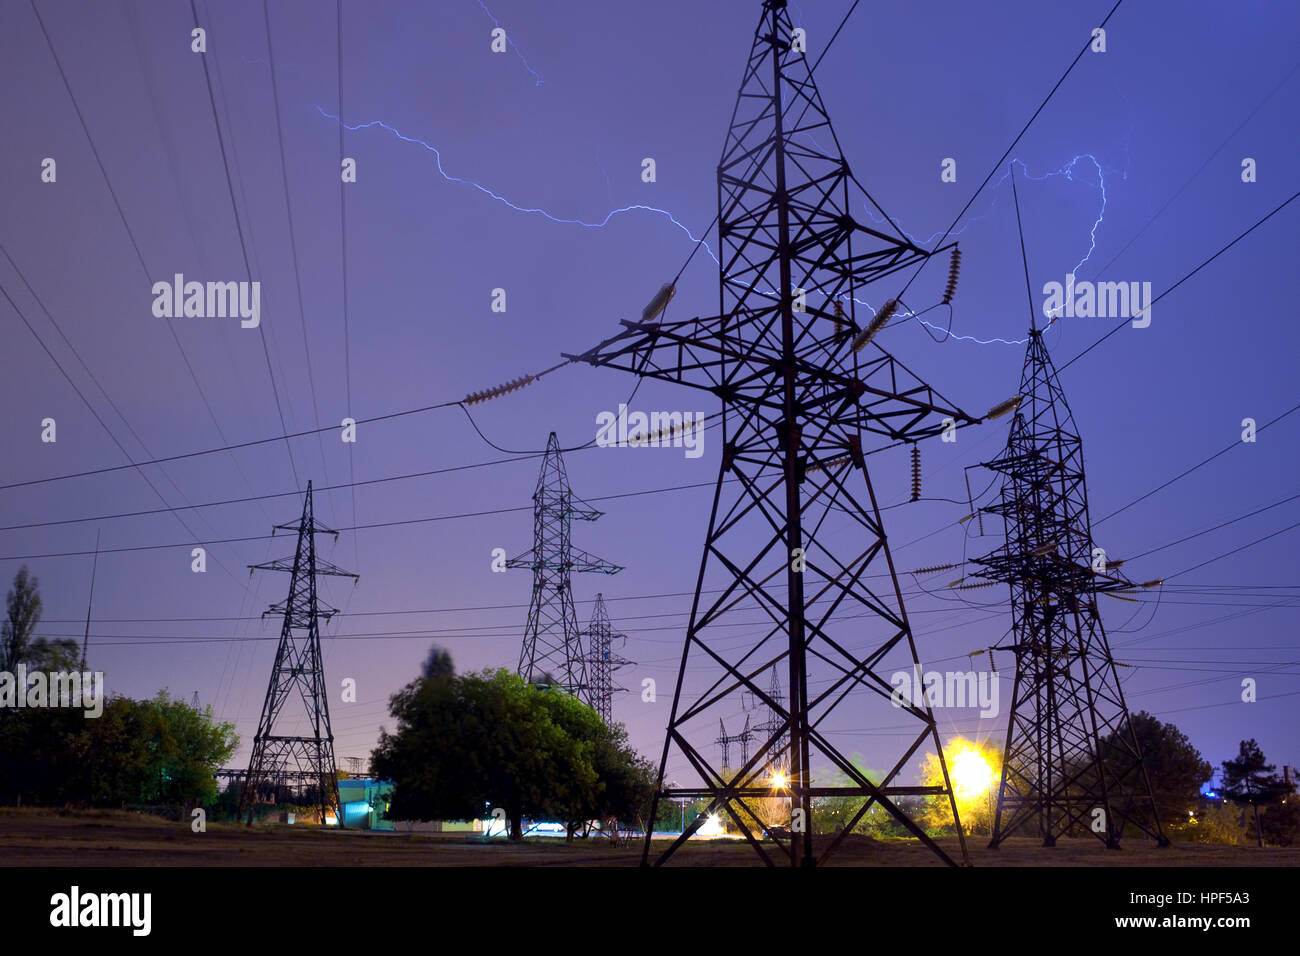 Power transmission lines being struck by lightning during the night thunderstorm Stock Photo